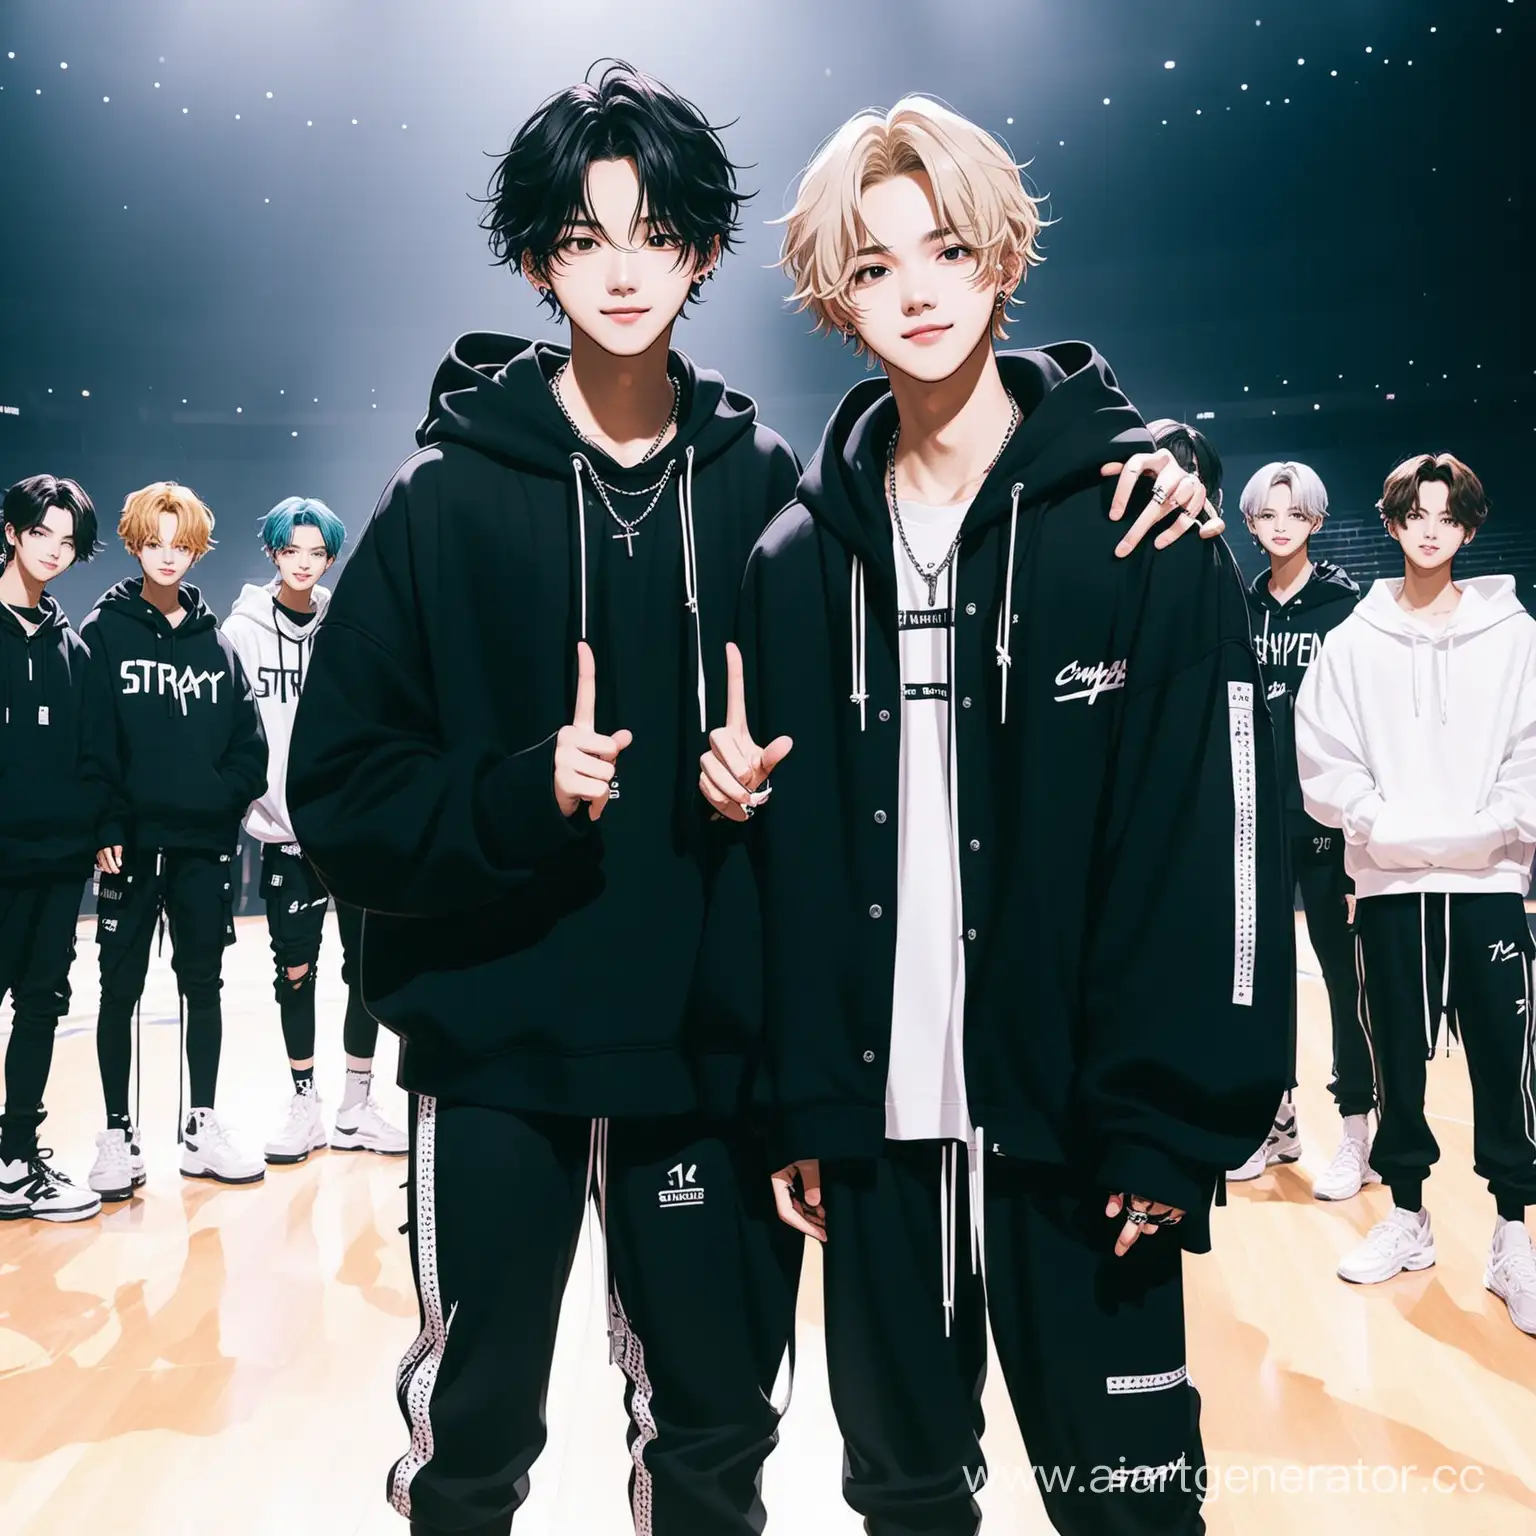 Chan-from-Stray-Kids-and-Jake-from-ENHYPEN-Pose-Together-in-Fashionable-Harmony